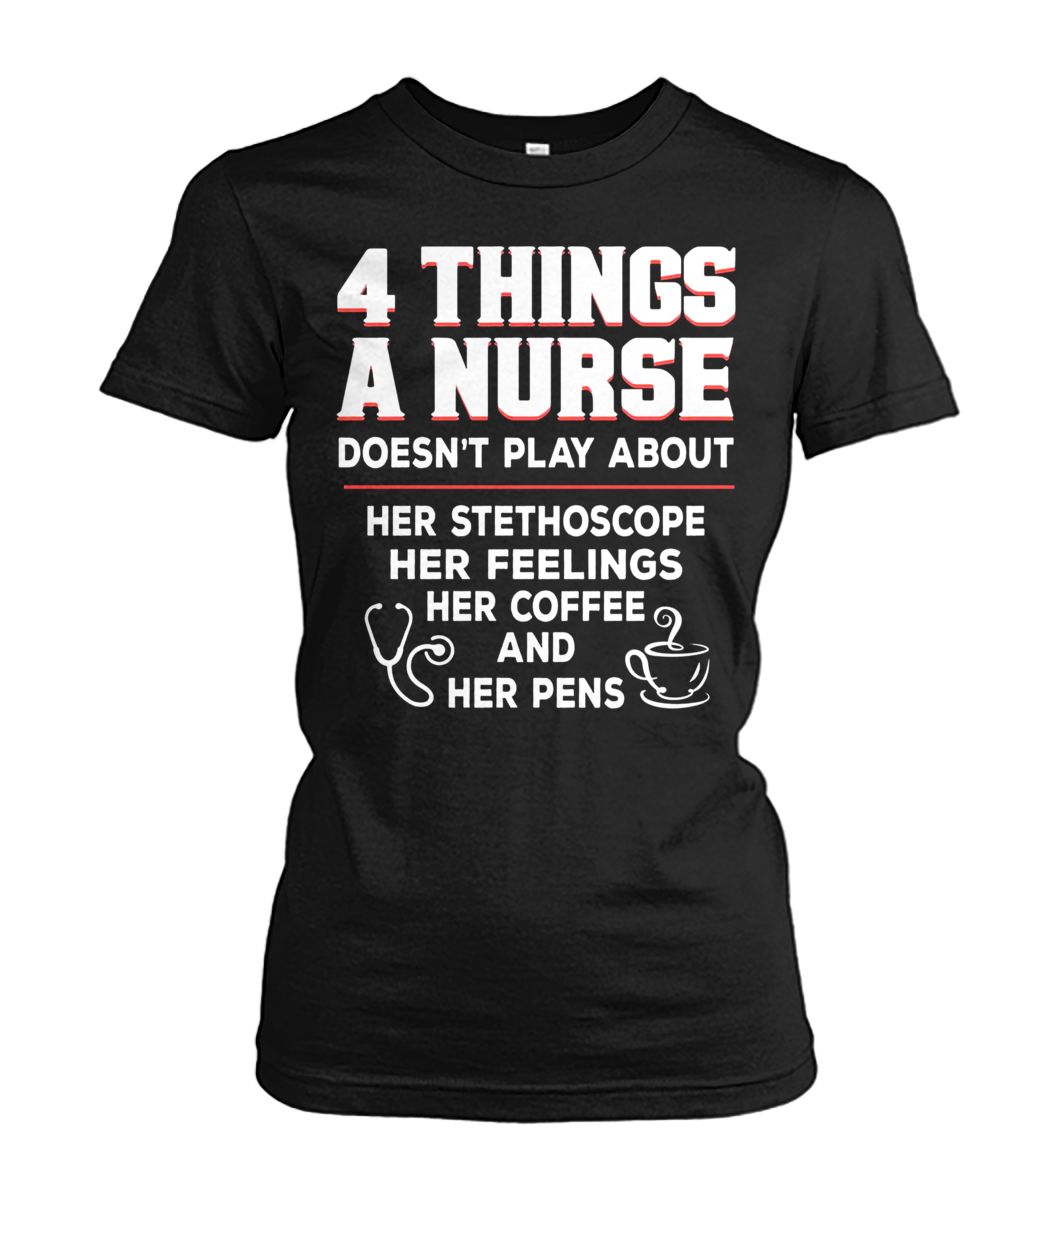 4 things a nurse doesn't play about her stethoscope women's crew tee